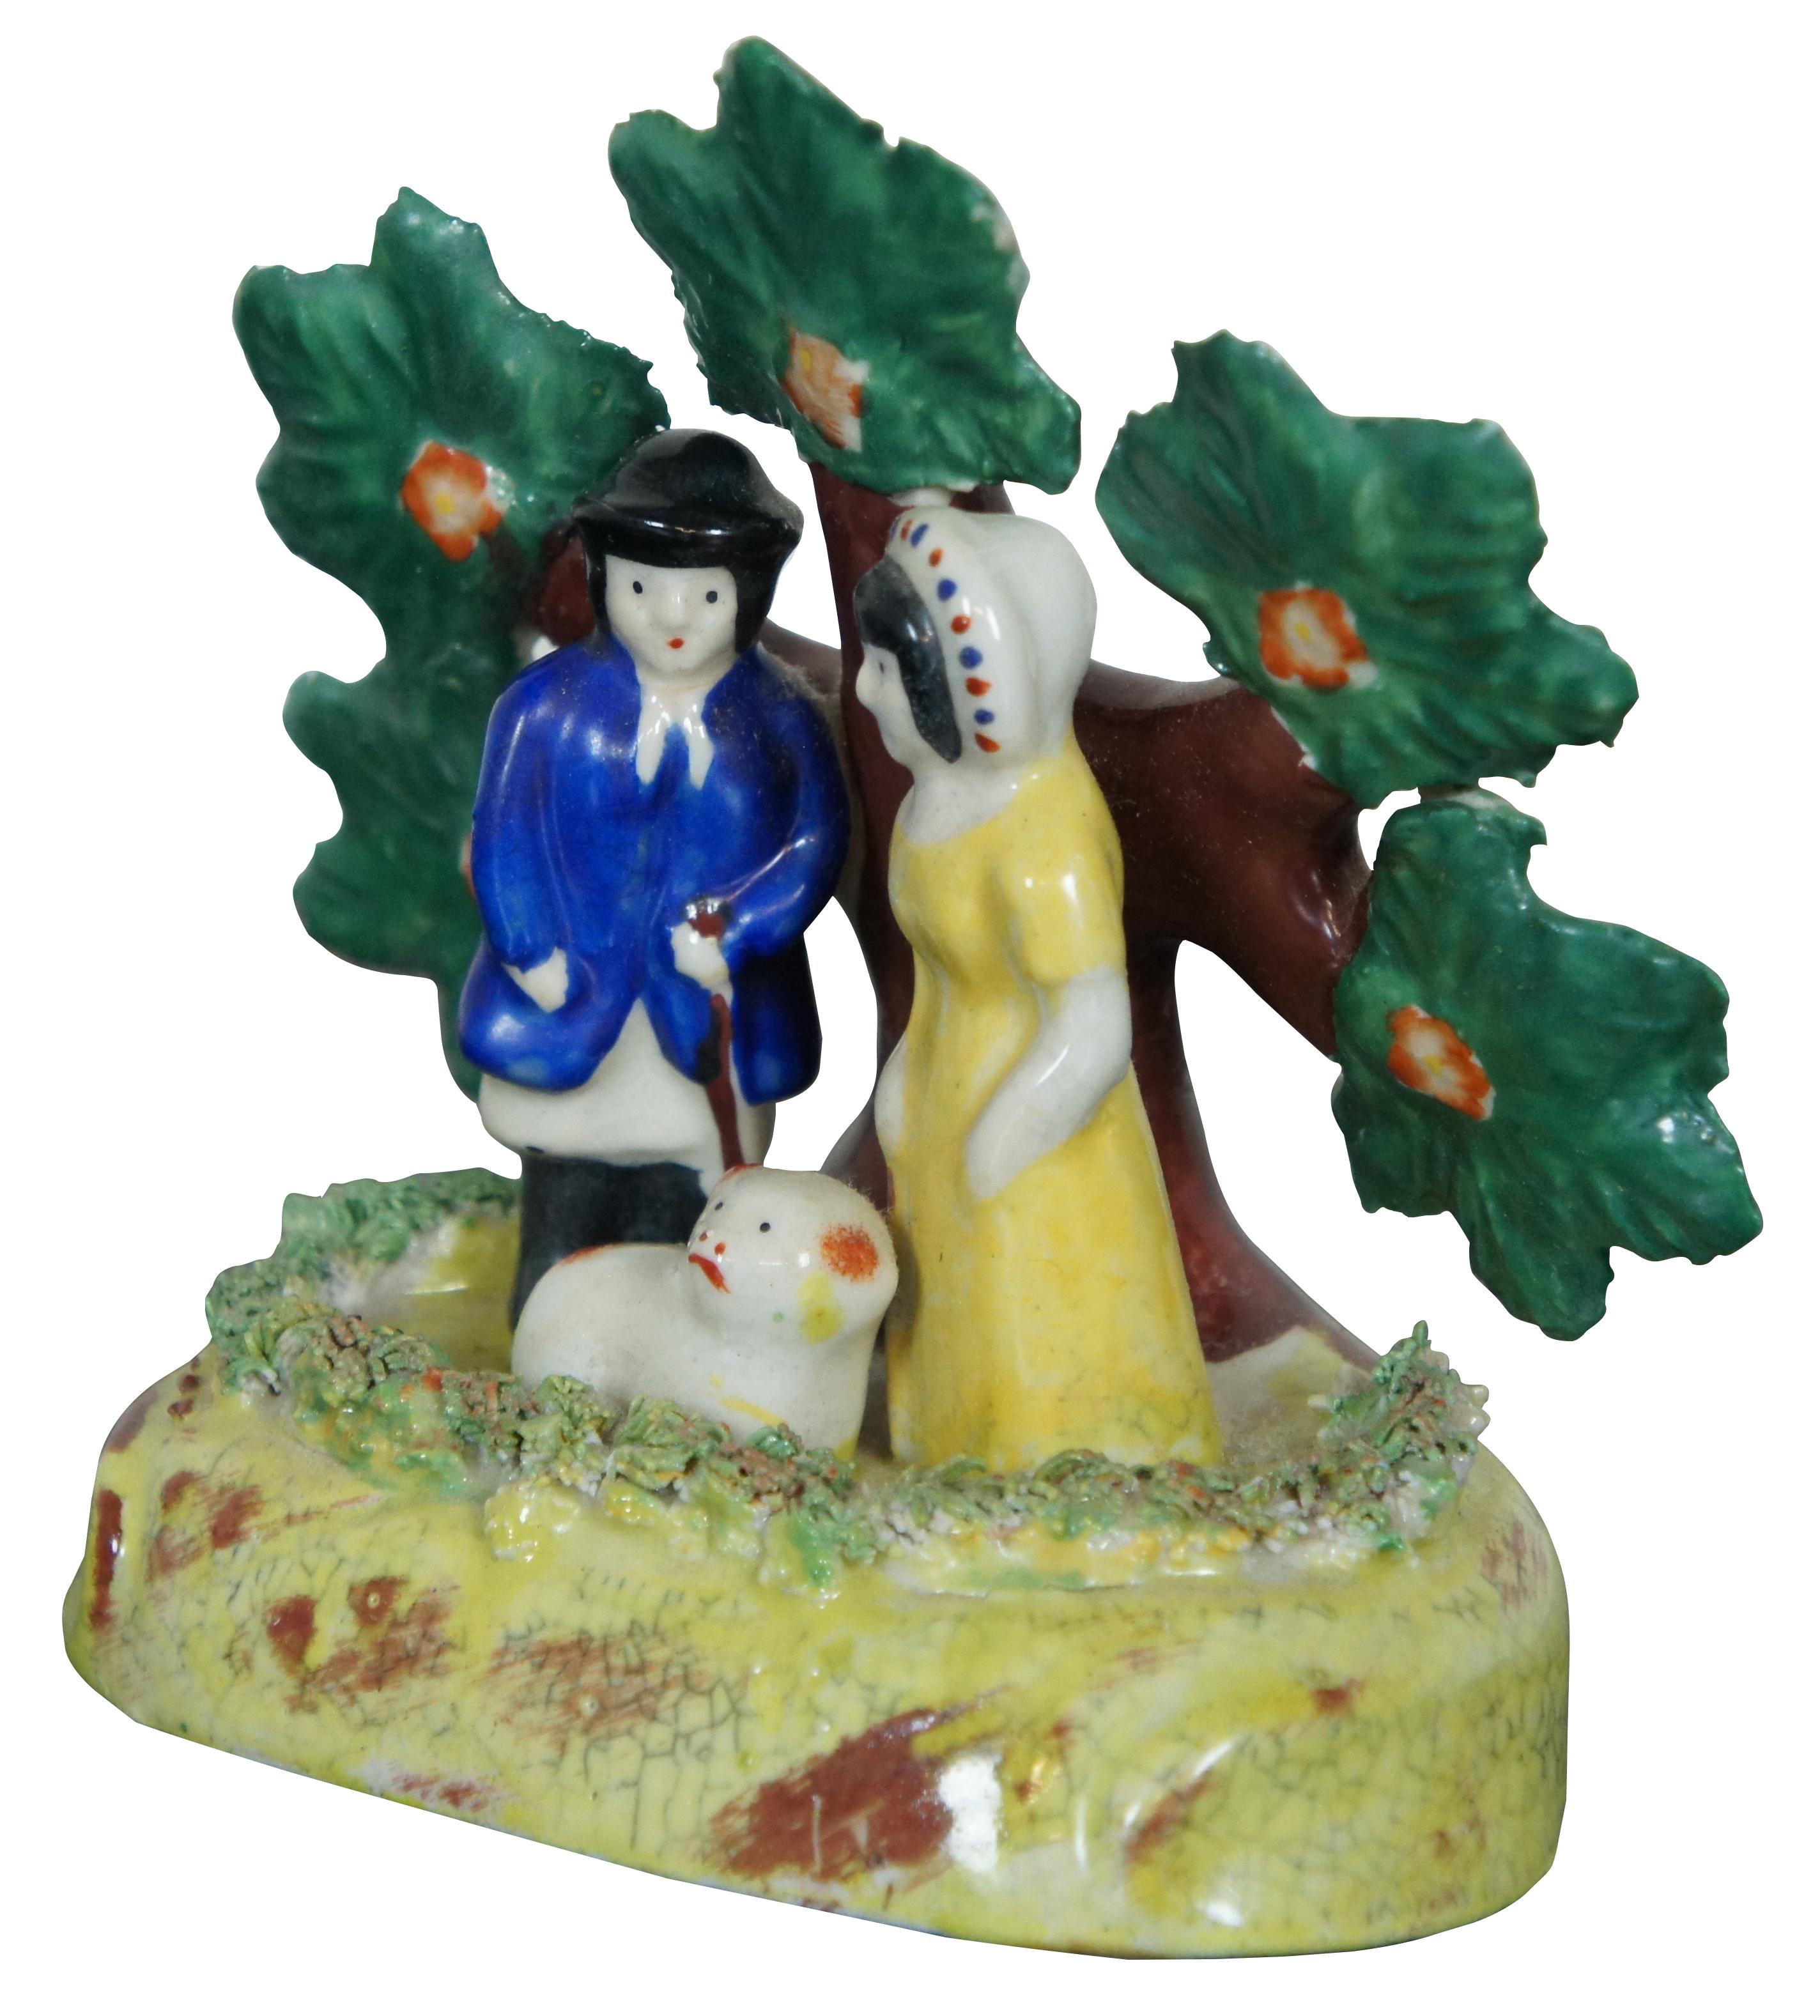 Antique early English Staffordshire porcelain pearlware bocage group, showing male and female shepherds with a red and white lamb, standing in front of a flowering tree.  Attributed to the James Dudson factory at Stoke on Trent, circa 1830-1860.